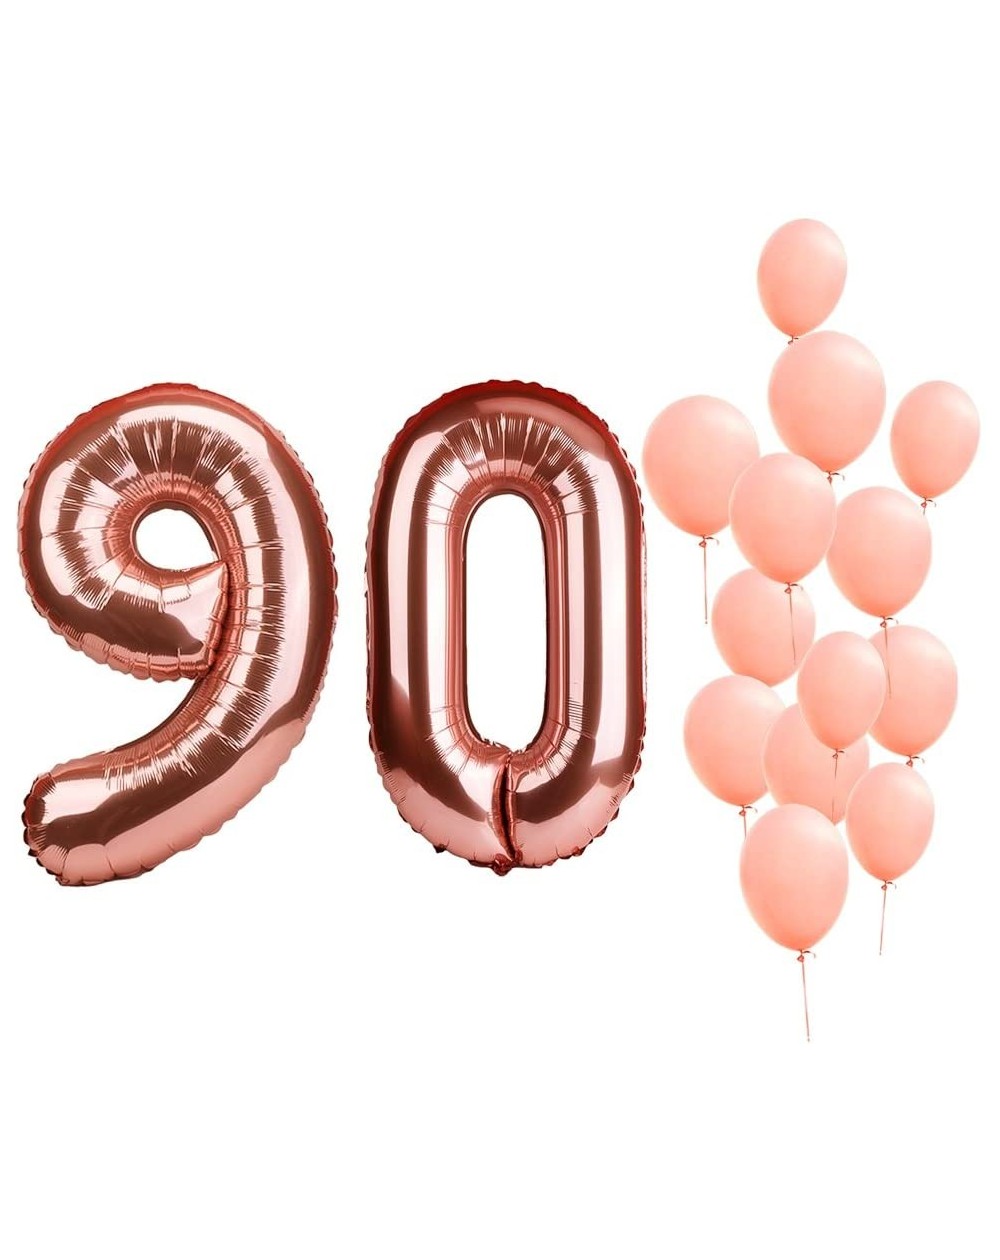 Balloons 40" Rose Gold Foil Mylar Number Balloons Birthday Party Wedding Decoration Helium Digit Balloons-Number 90 - Rose Go...